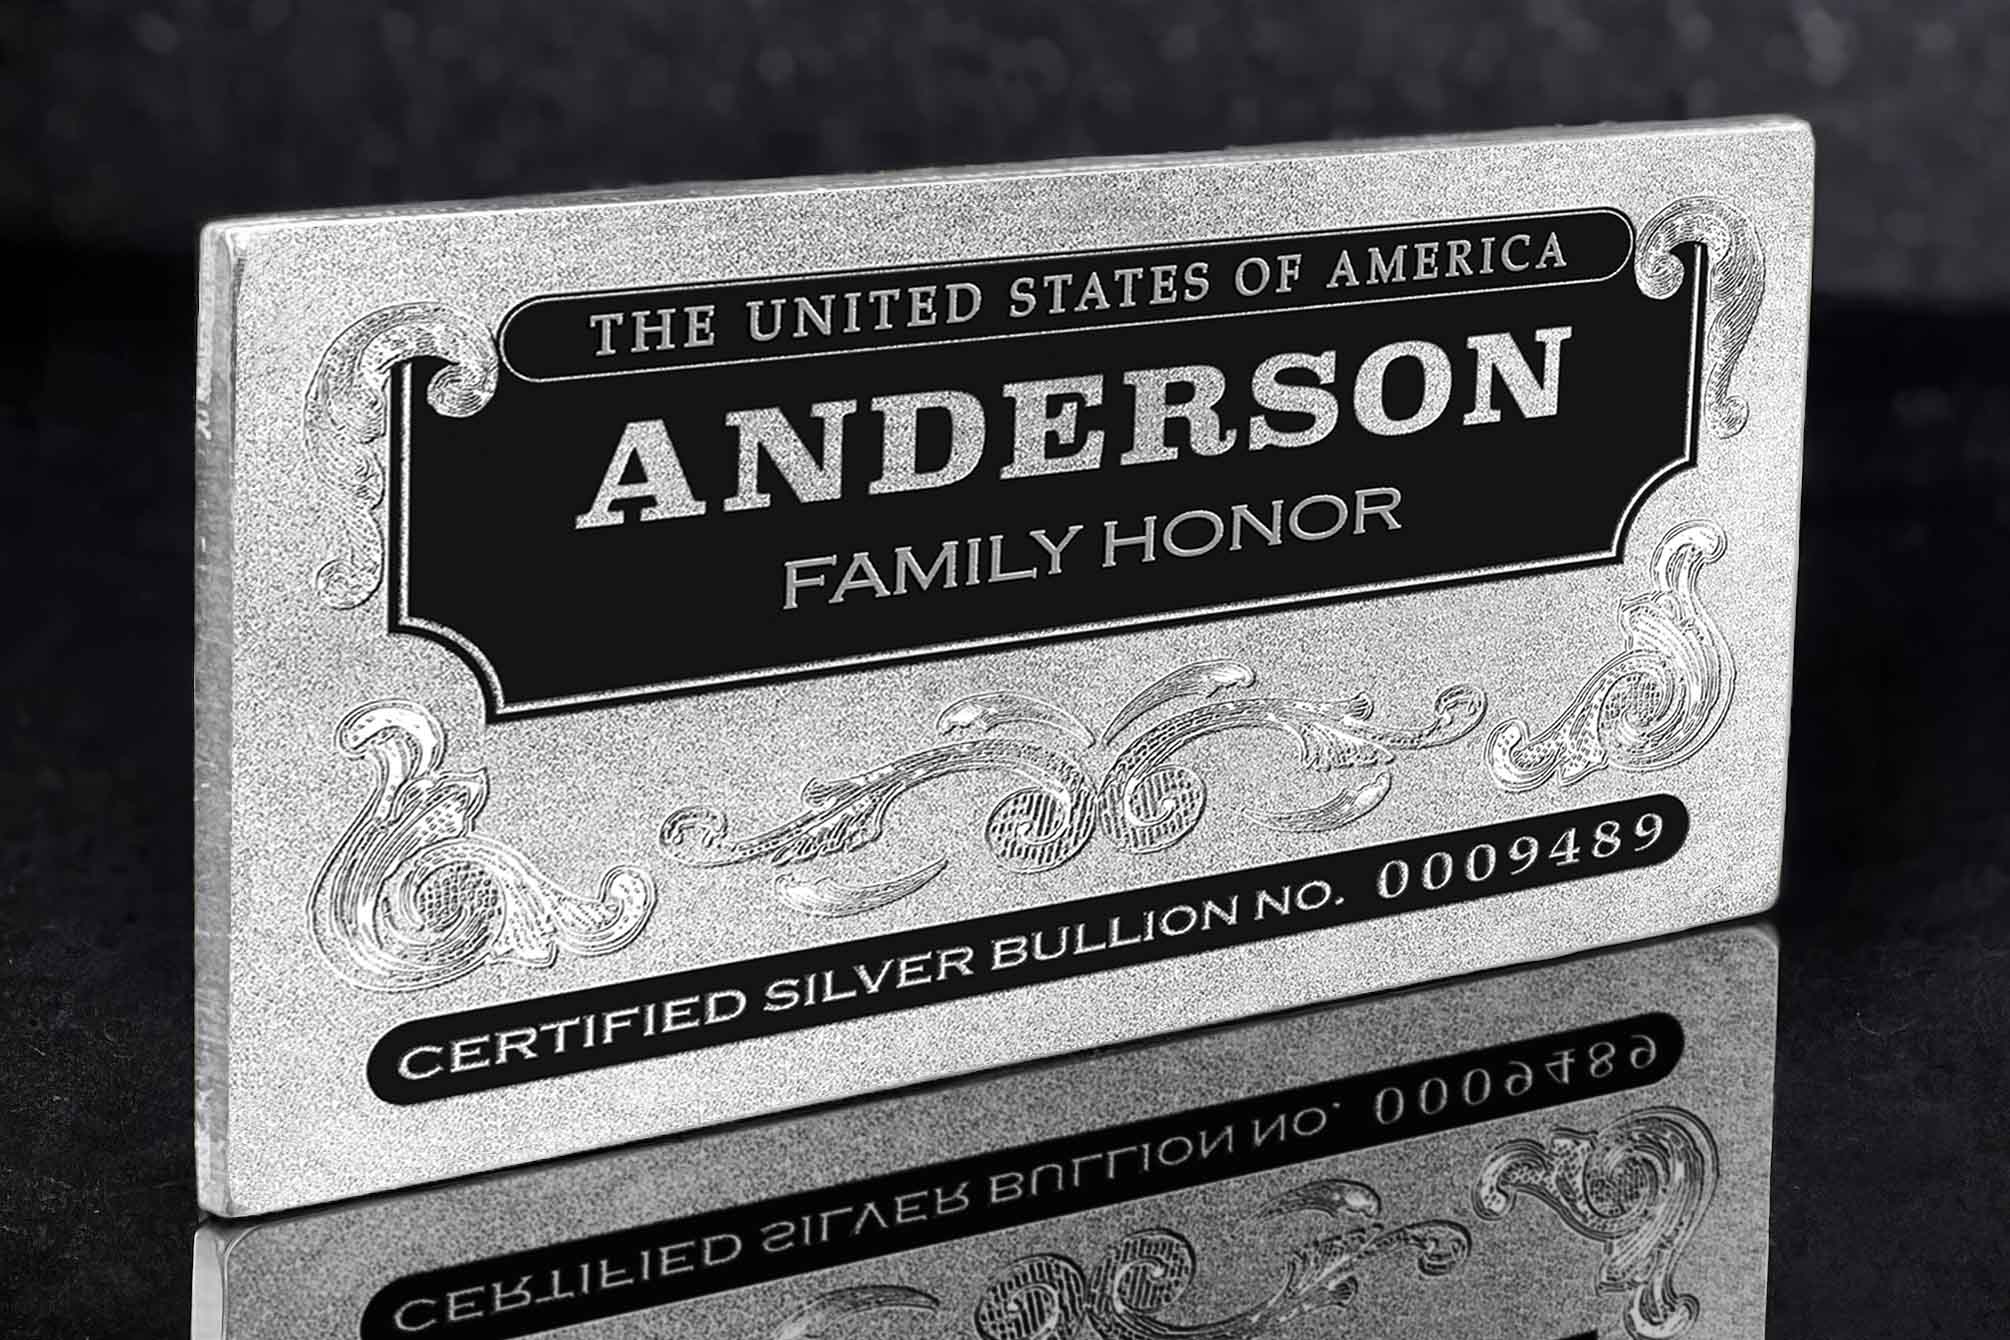 12oz Jumbo 'Personalized Name' Family Honor Silver Bars, Certified Silver Bullion